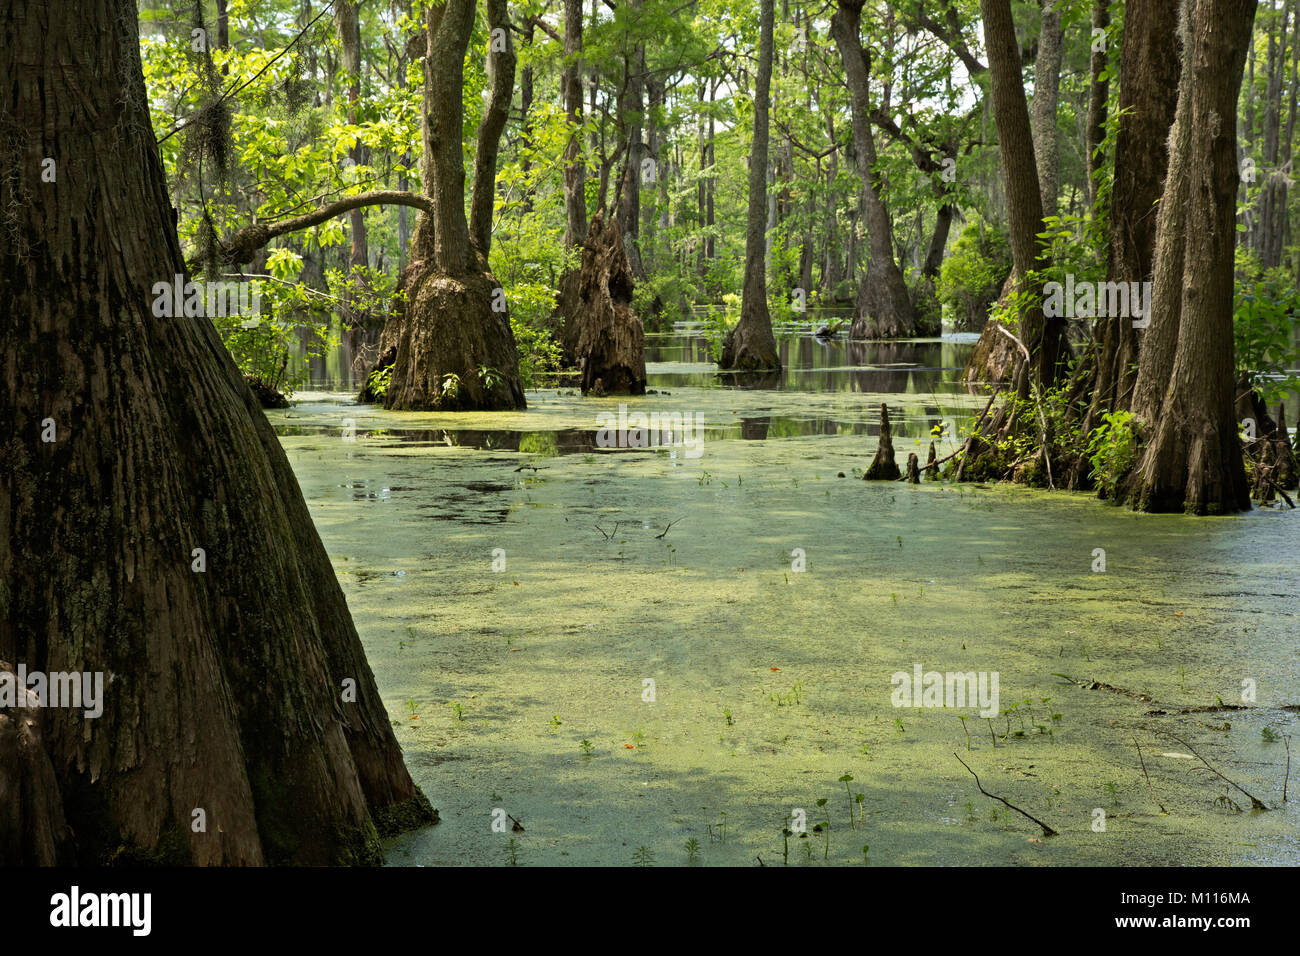 NC01447-00...NORTH CAROLINA - A cypress swamp and planty of duckweed reflecting in the still waters of Merchant Millpond in Merchant Millpond State Pa Stock Photo